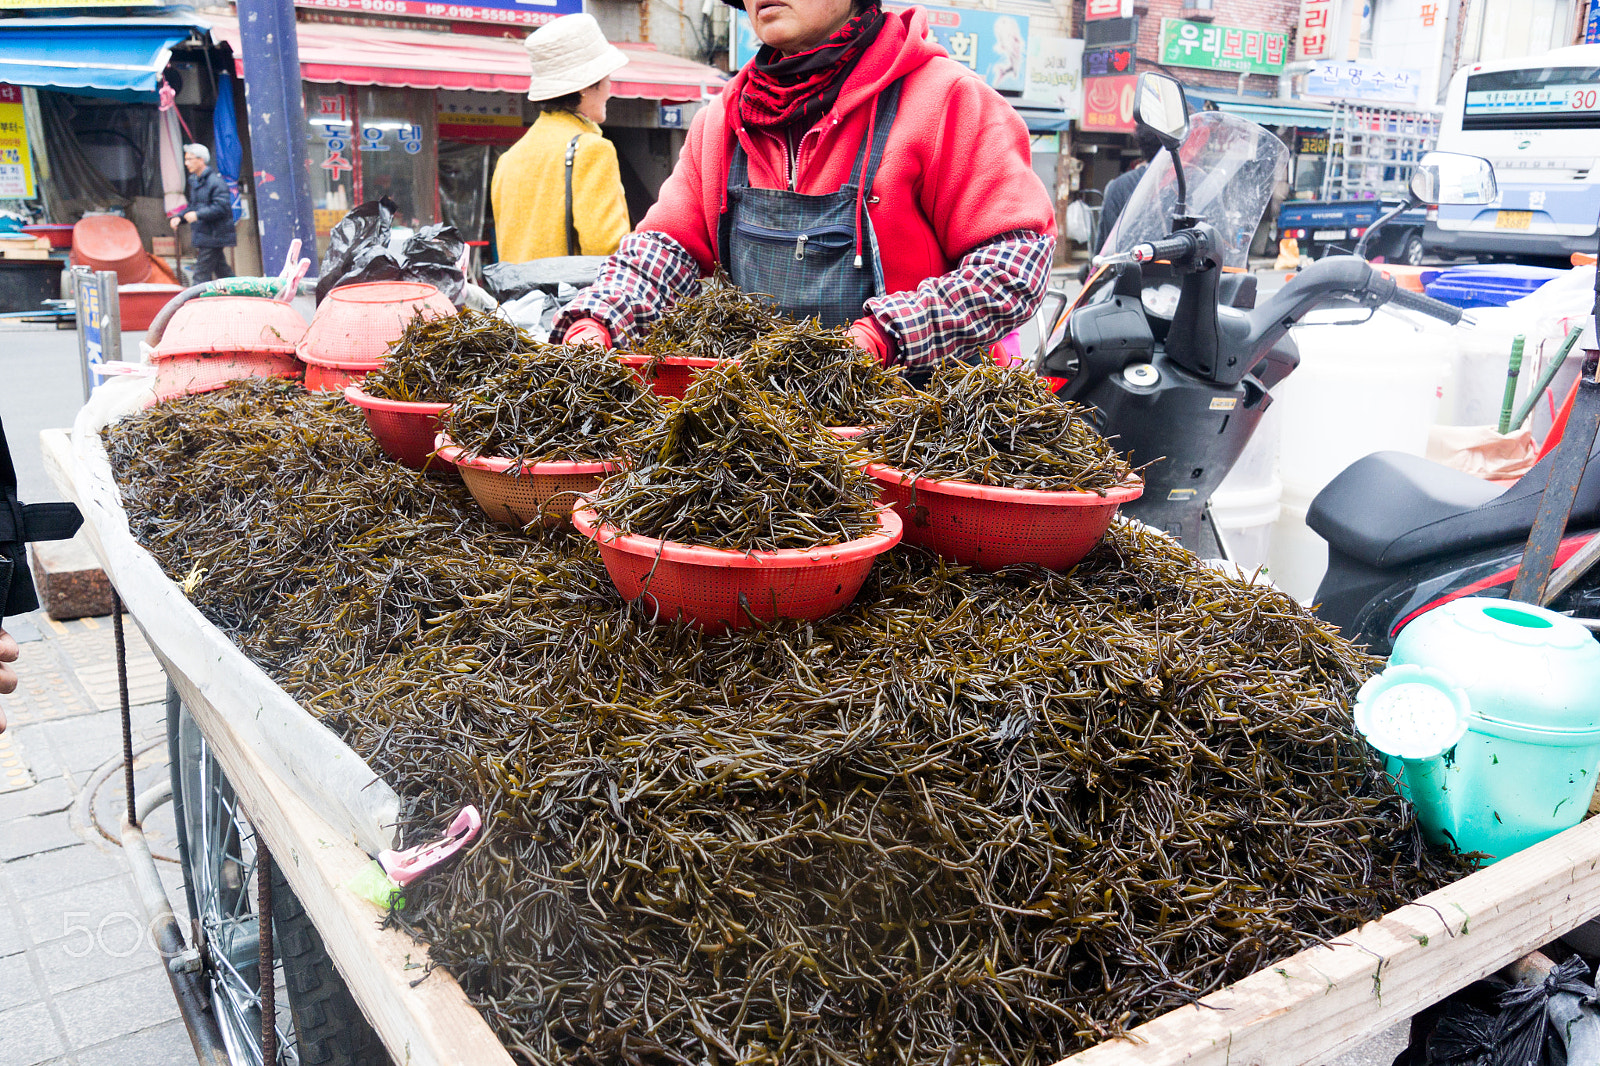 Nikon 1 Nikkor AW 11-27.5mm F3.5-5.6 sample photo. A woman sell seaweed on a cart in seafood market photography